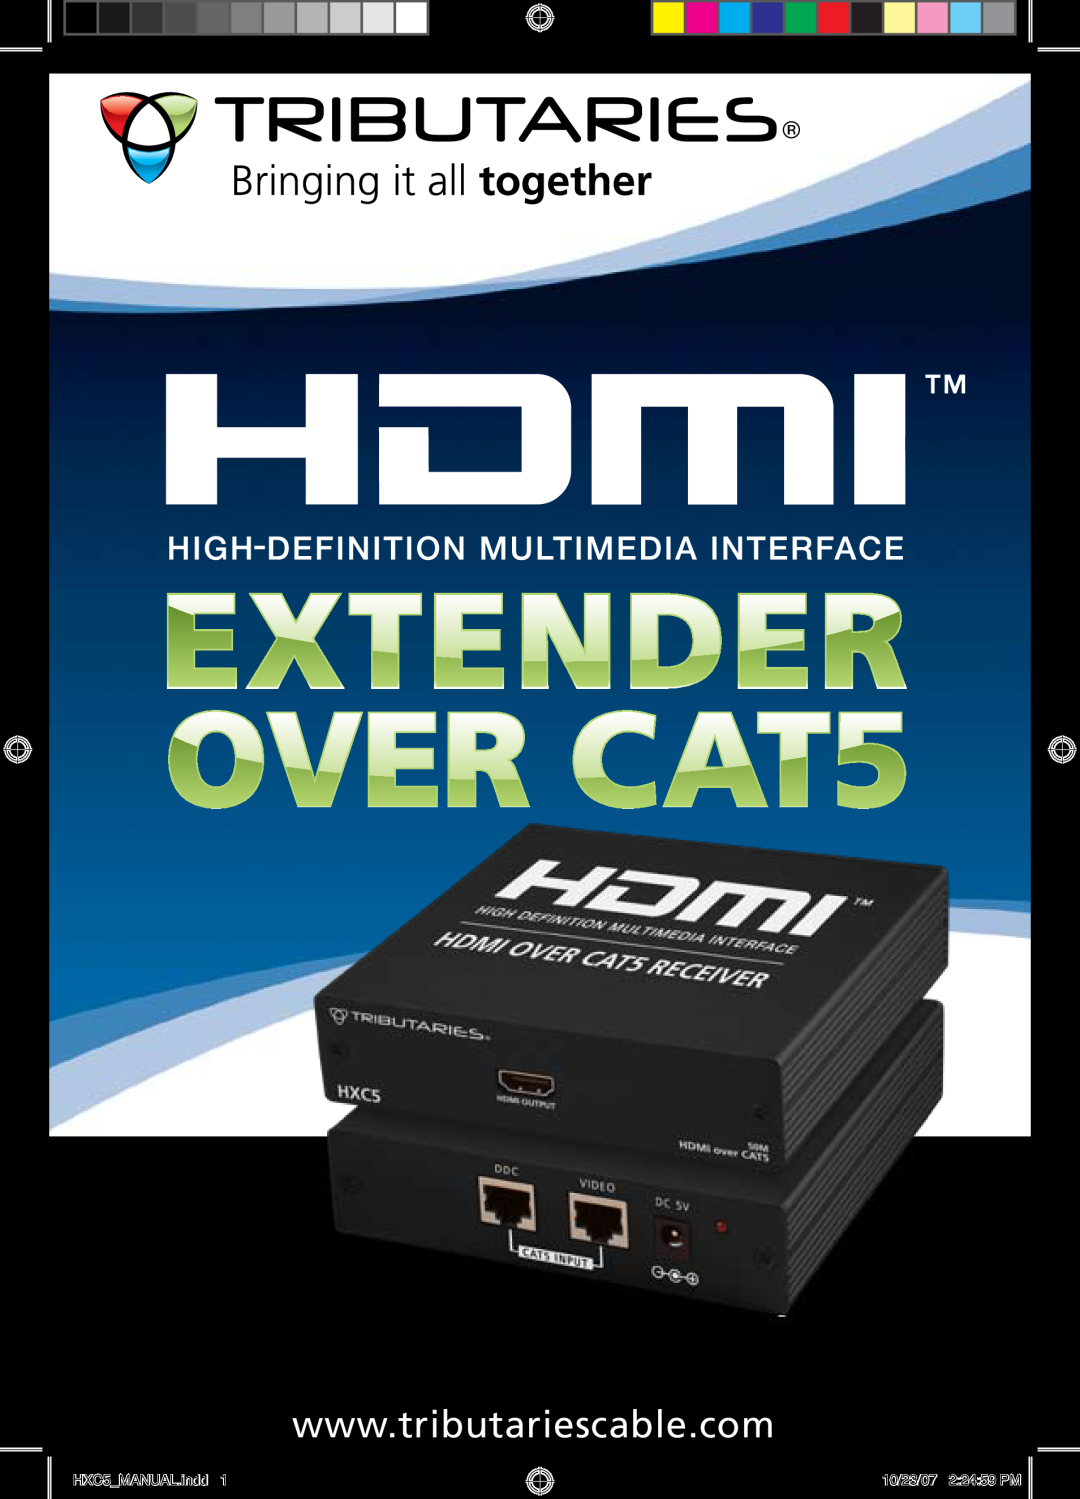 Tributaries manual HXC5 Extends HDMI over CAT5 50 meters, HXC5MANUAL.indd, 10/23/07 22459 PM 